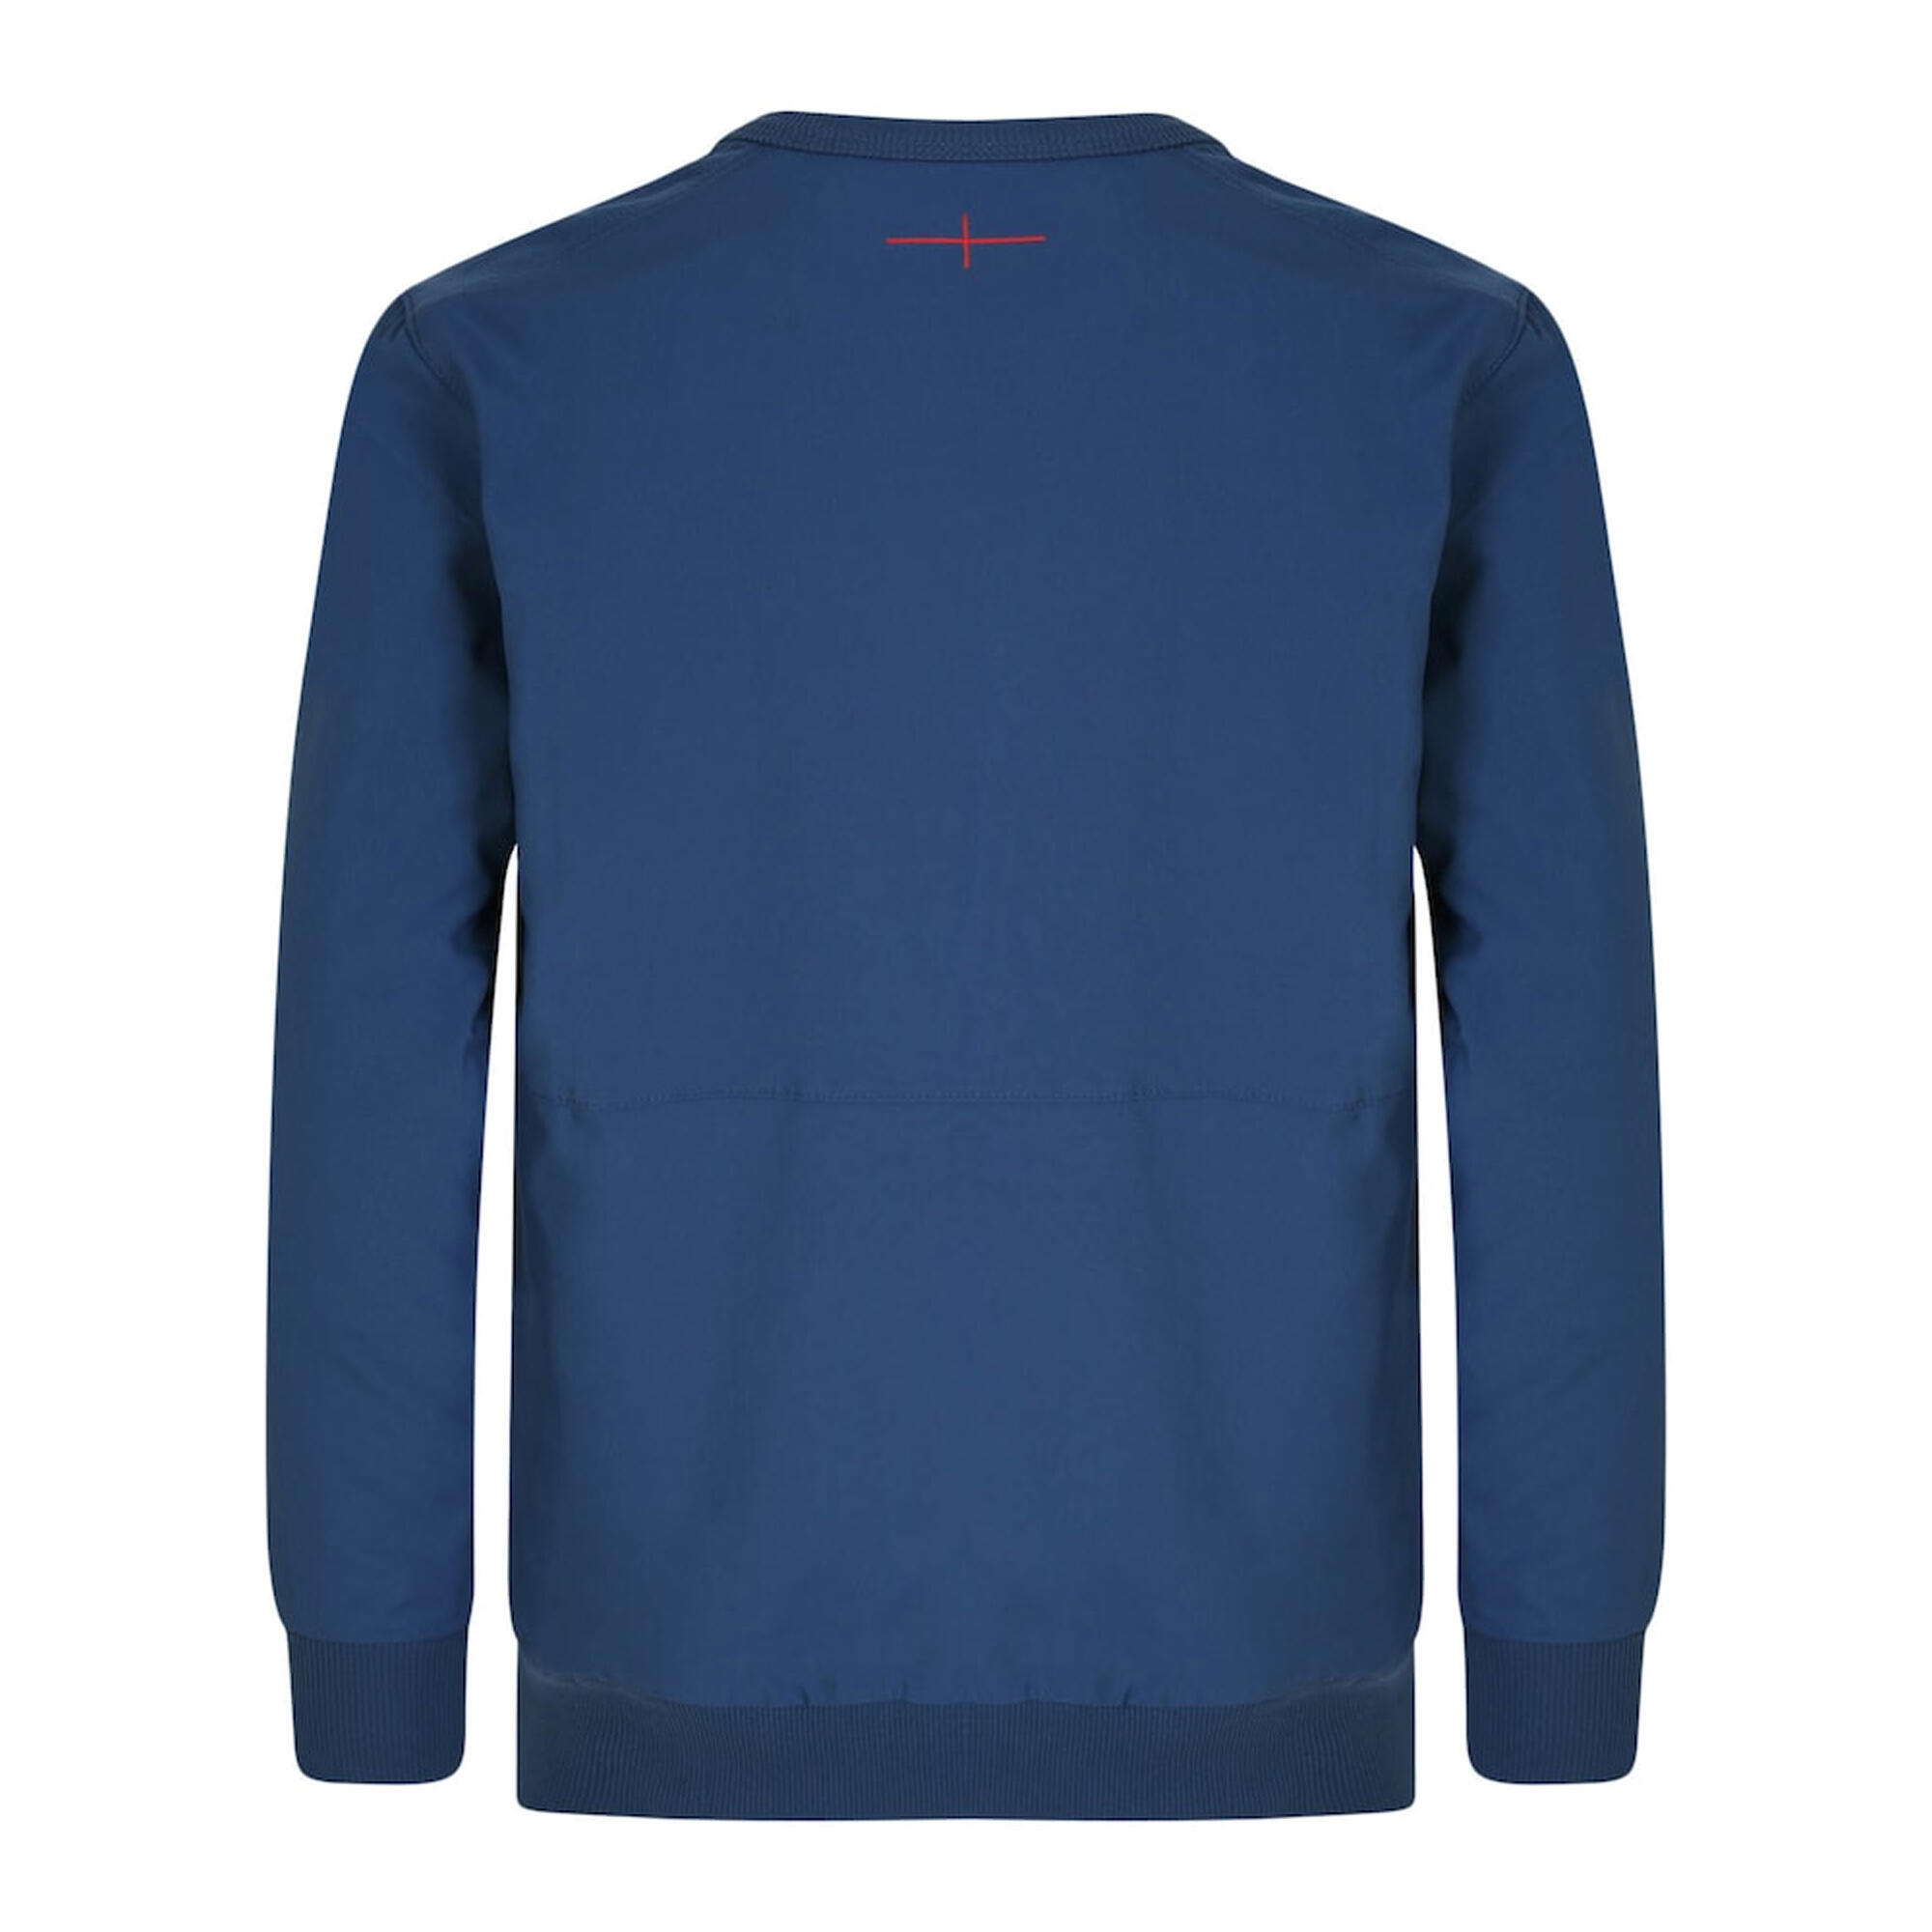 England Rugby Mens 22/23 Woven Sweatshirt (Ensign Blue) 2/4